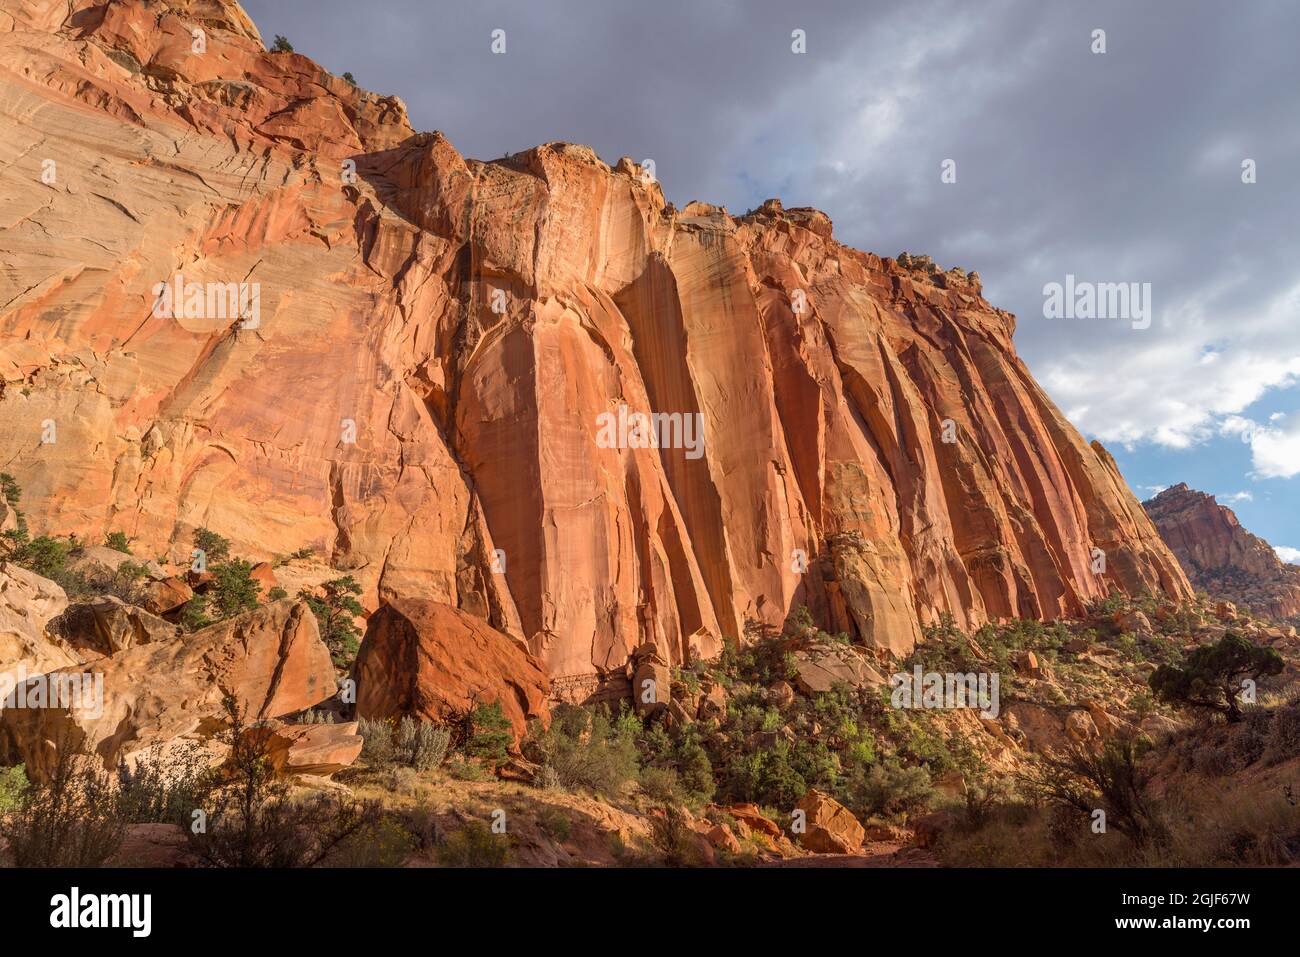 USA, Utah, Capitol Reef National Park, Storm clouds gather over steep cliffs of Wingate Sandstone near opening of Capitol Gorge. Stock Photo